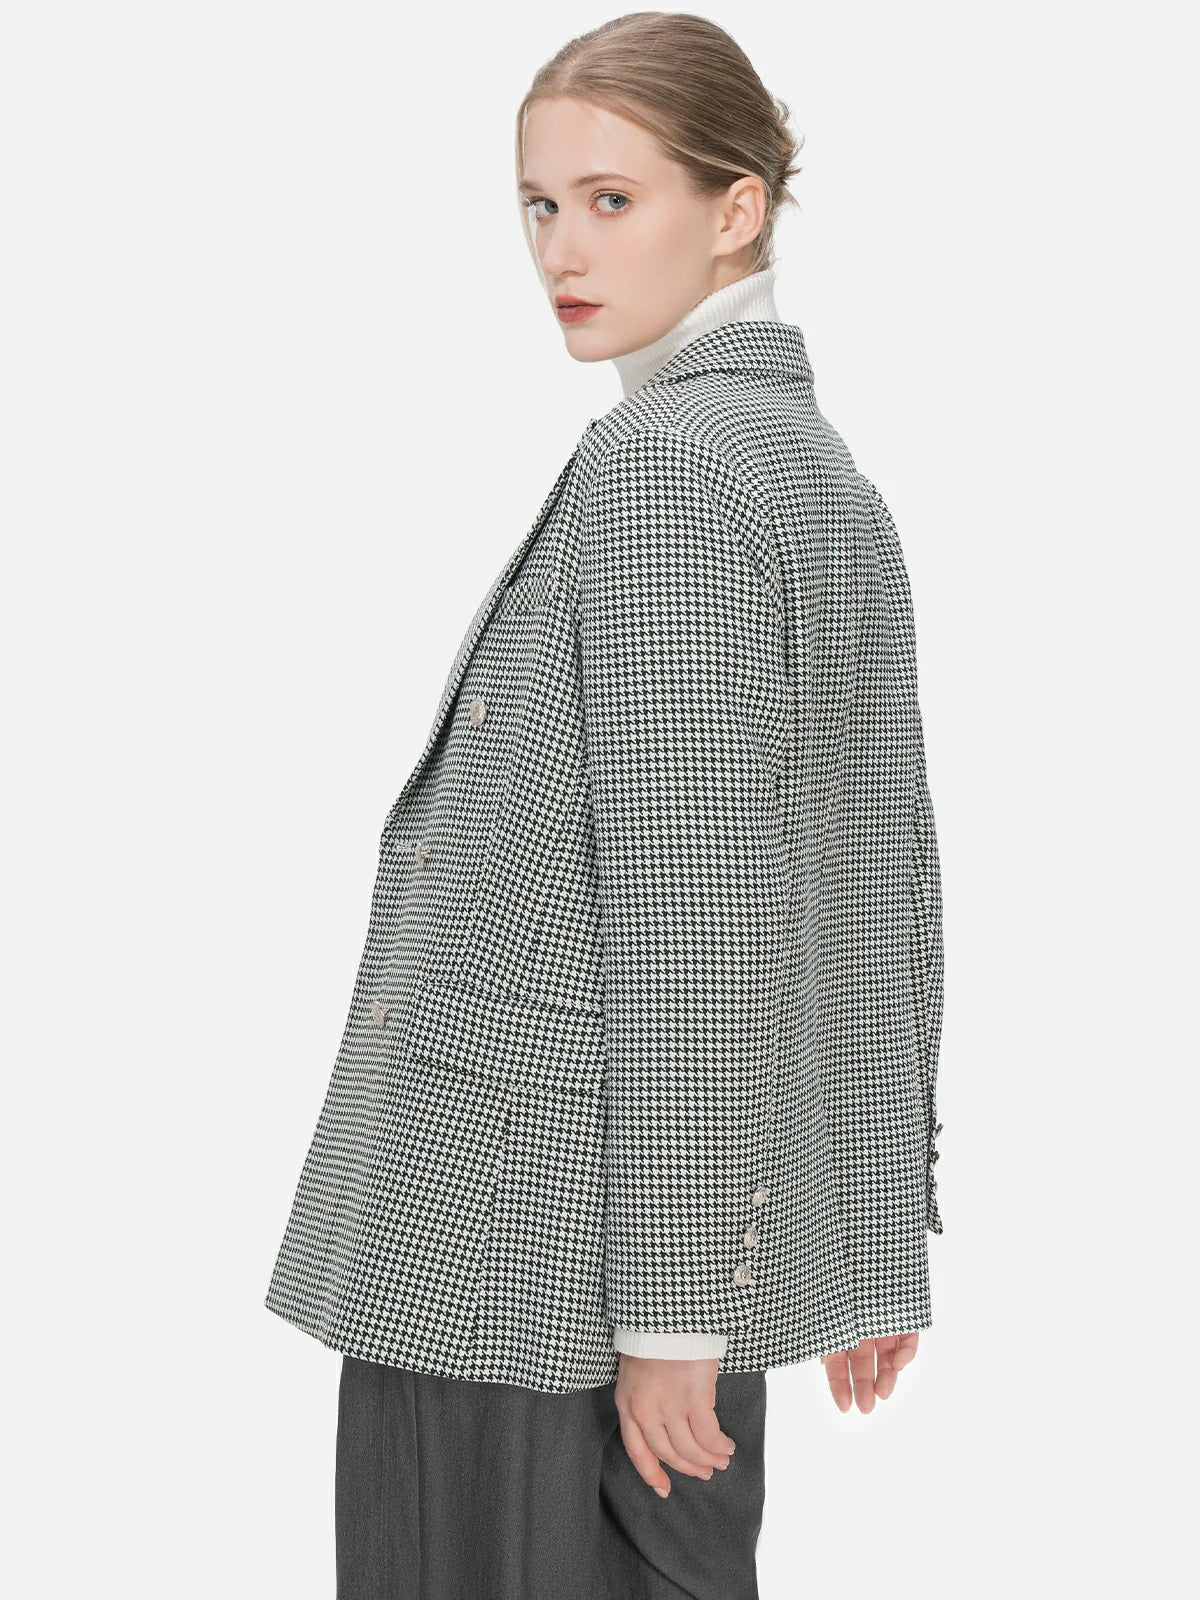 Define your fashion identity with this green-toned houndstooth blazer, presenting a perfect fusion of classic and contemporary styles, complete with padded shoulders and a double-breasted silhouette, ensuring both professionalism and comfort.